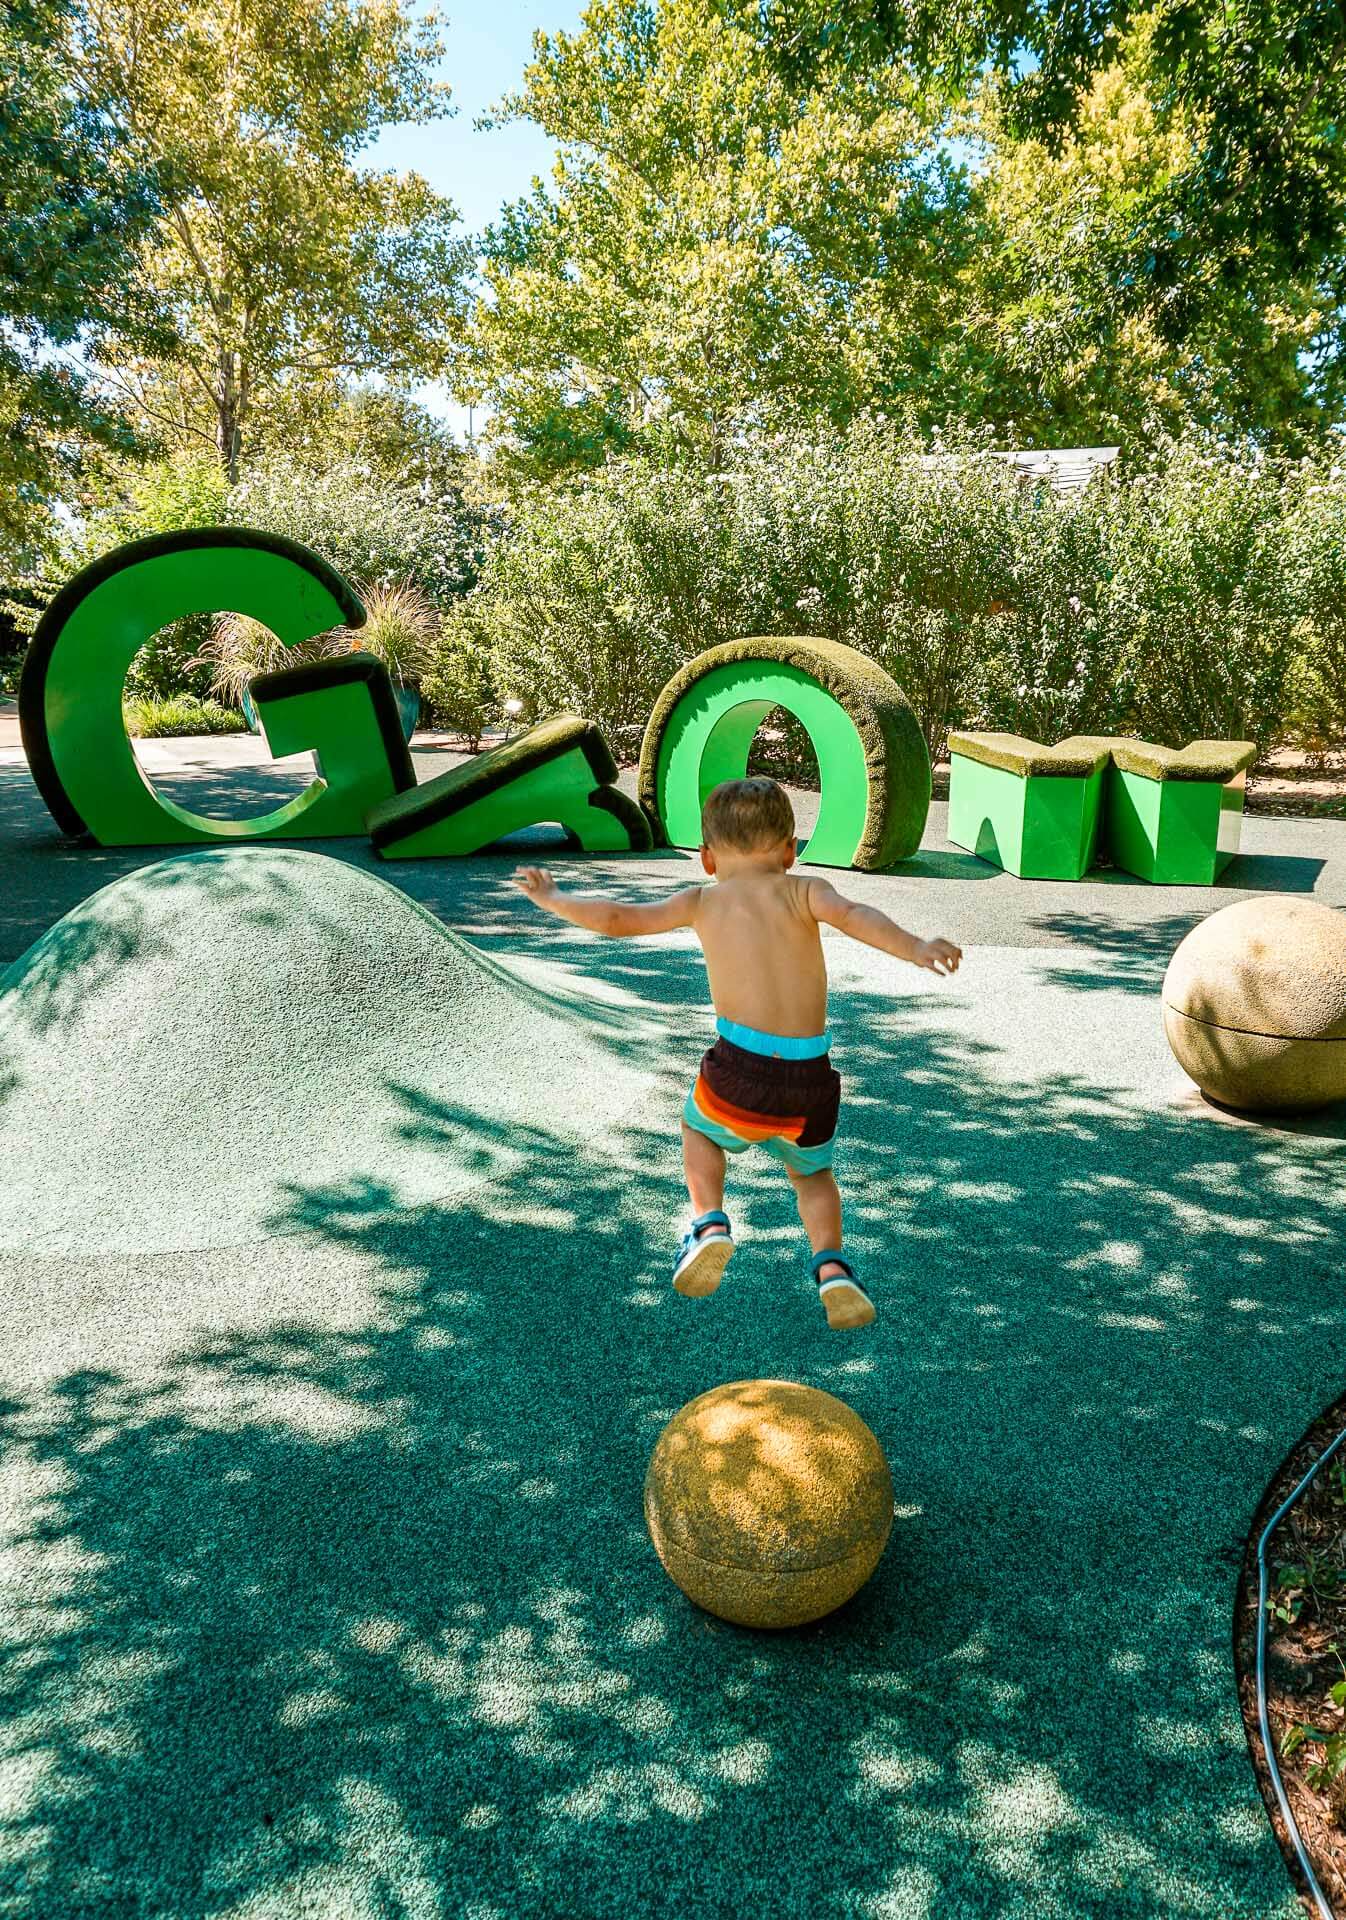 A boy jumping from a ball with "GROW" climbing letters in the background. Myriad Botanical Gardens Children's Garden.